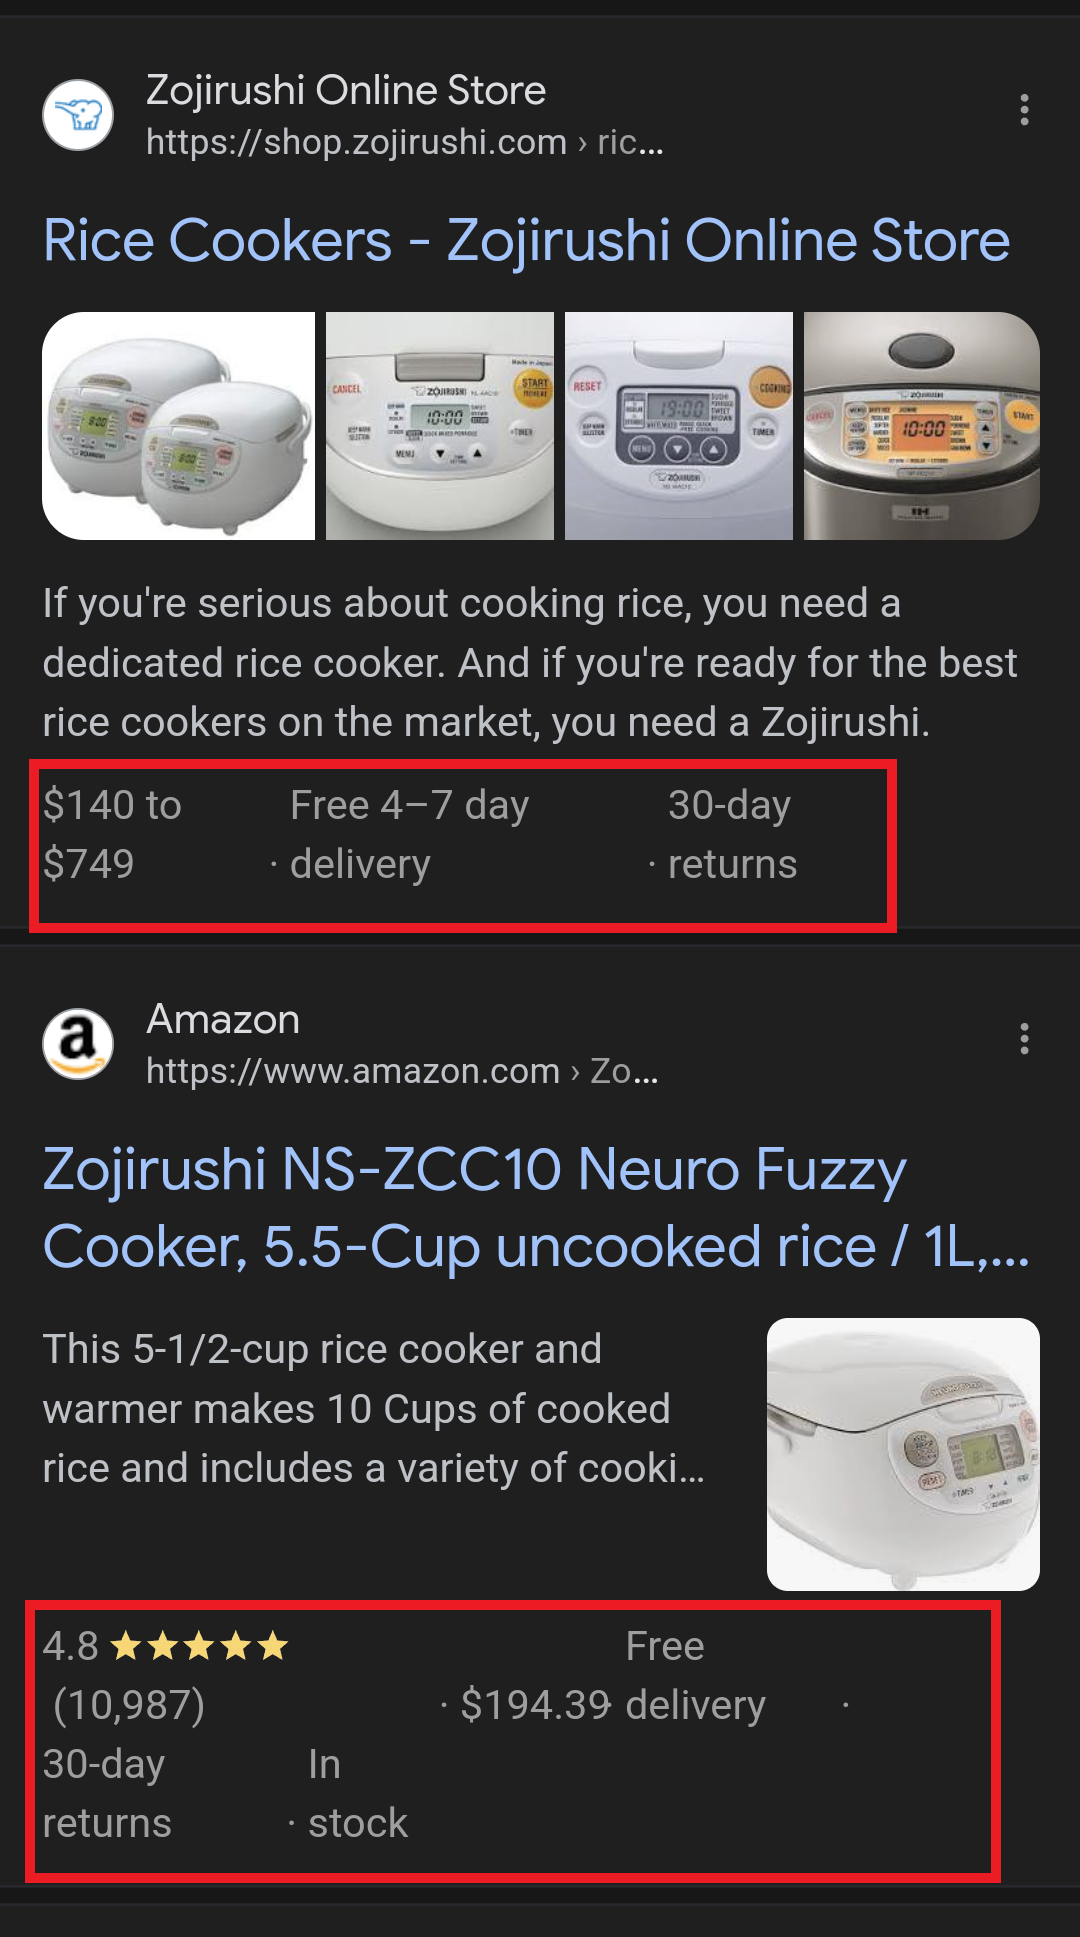 Rice cooker rich result - An In-Depth Guide And Best Practices For Mobile SEO